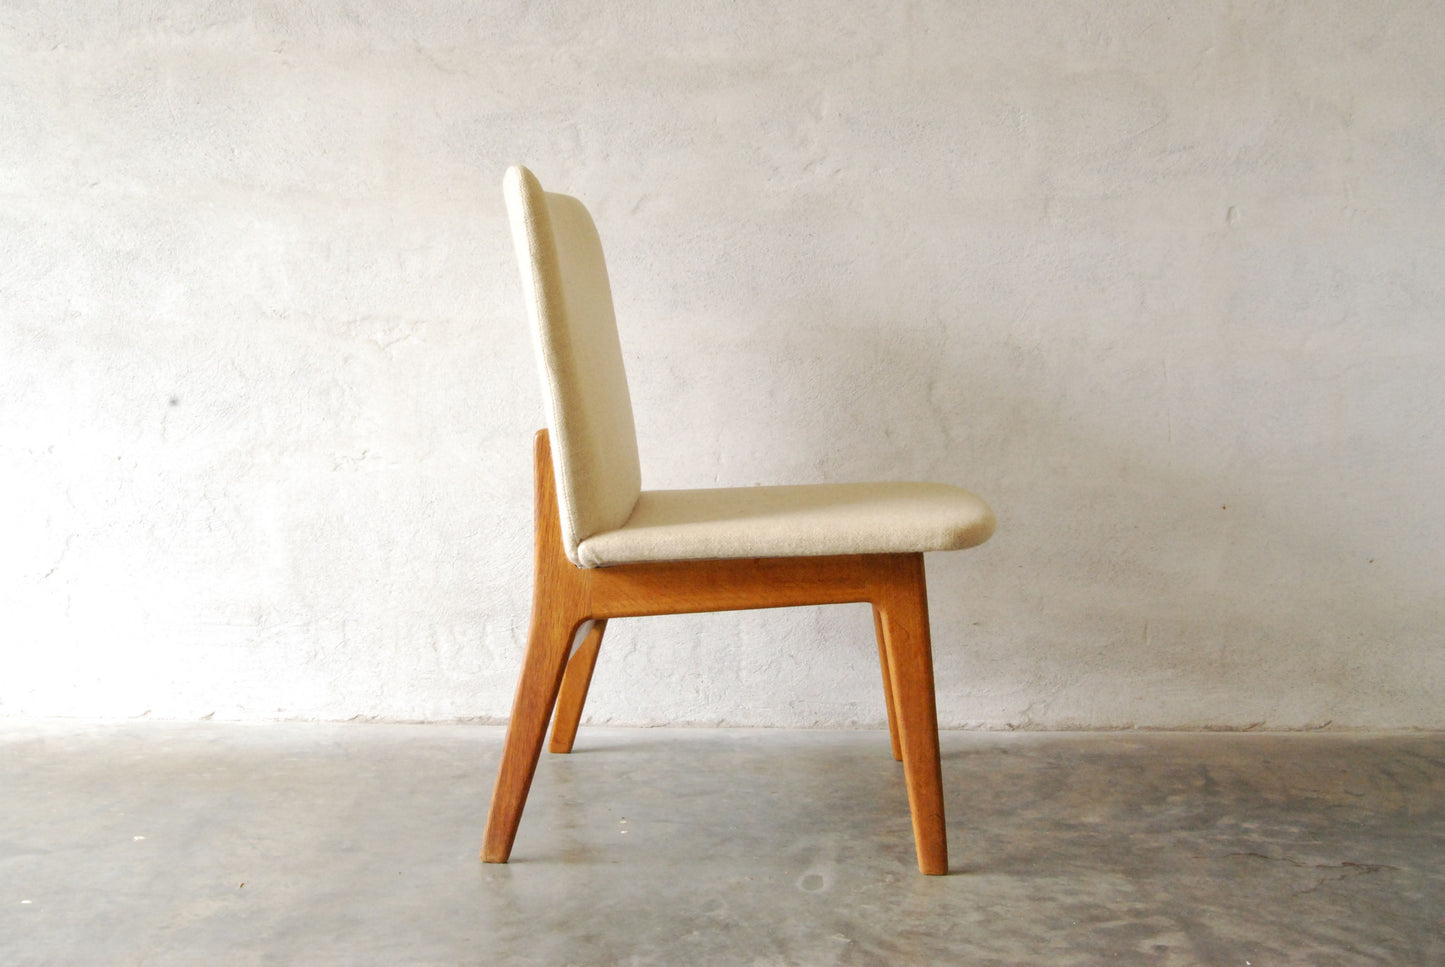 Pair of occasional chairs by Børge Mogensen